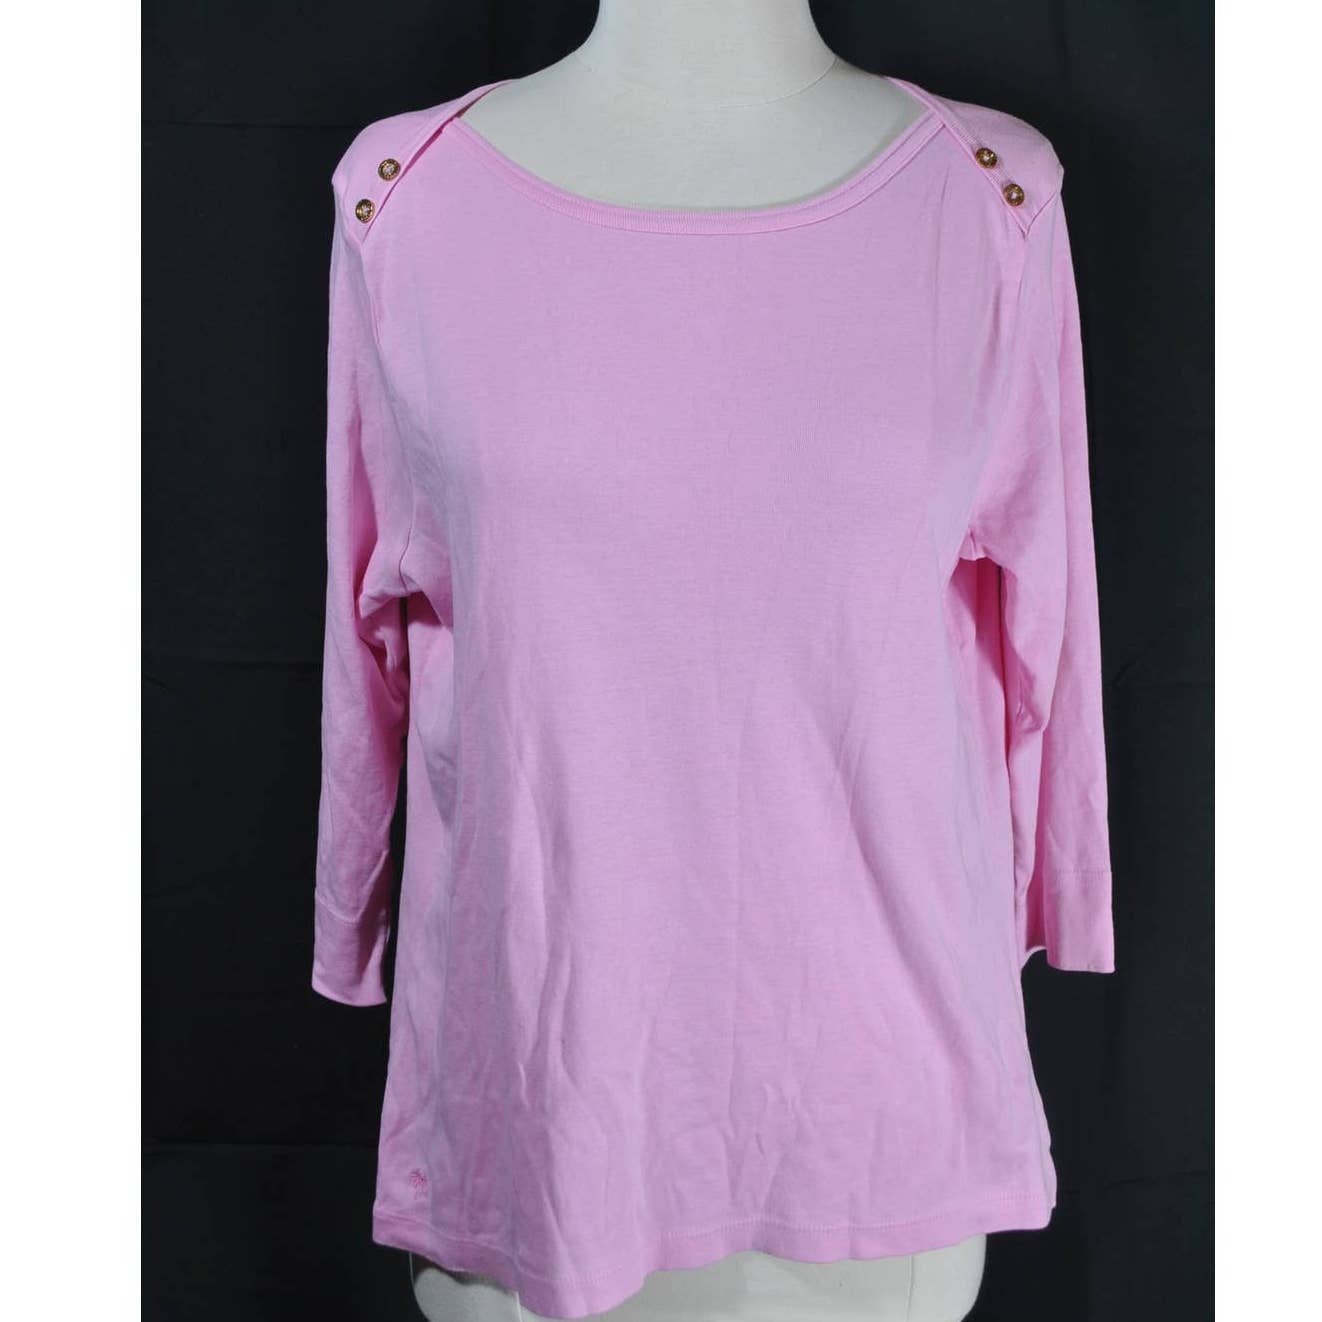 Lilly Pulitzer Pink 3/4 Sleeve Top - XL